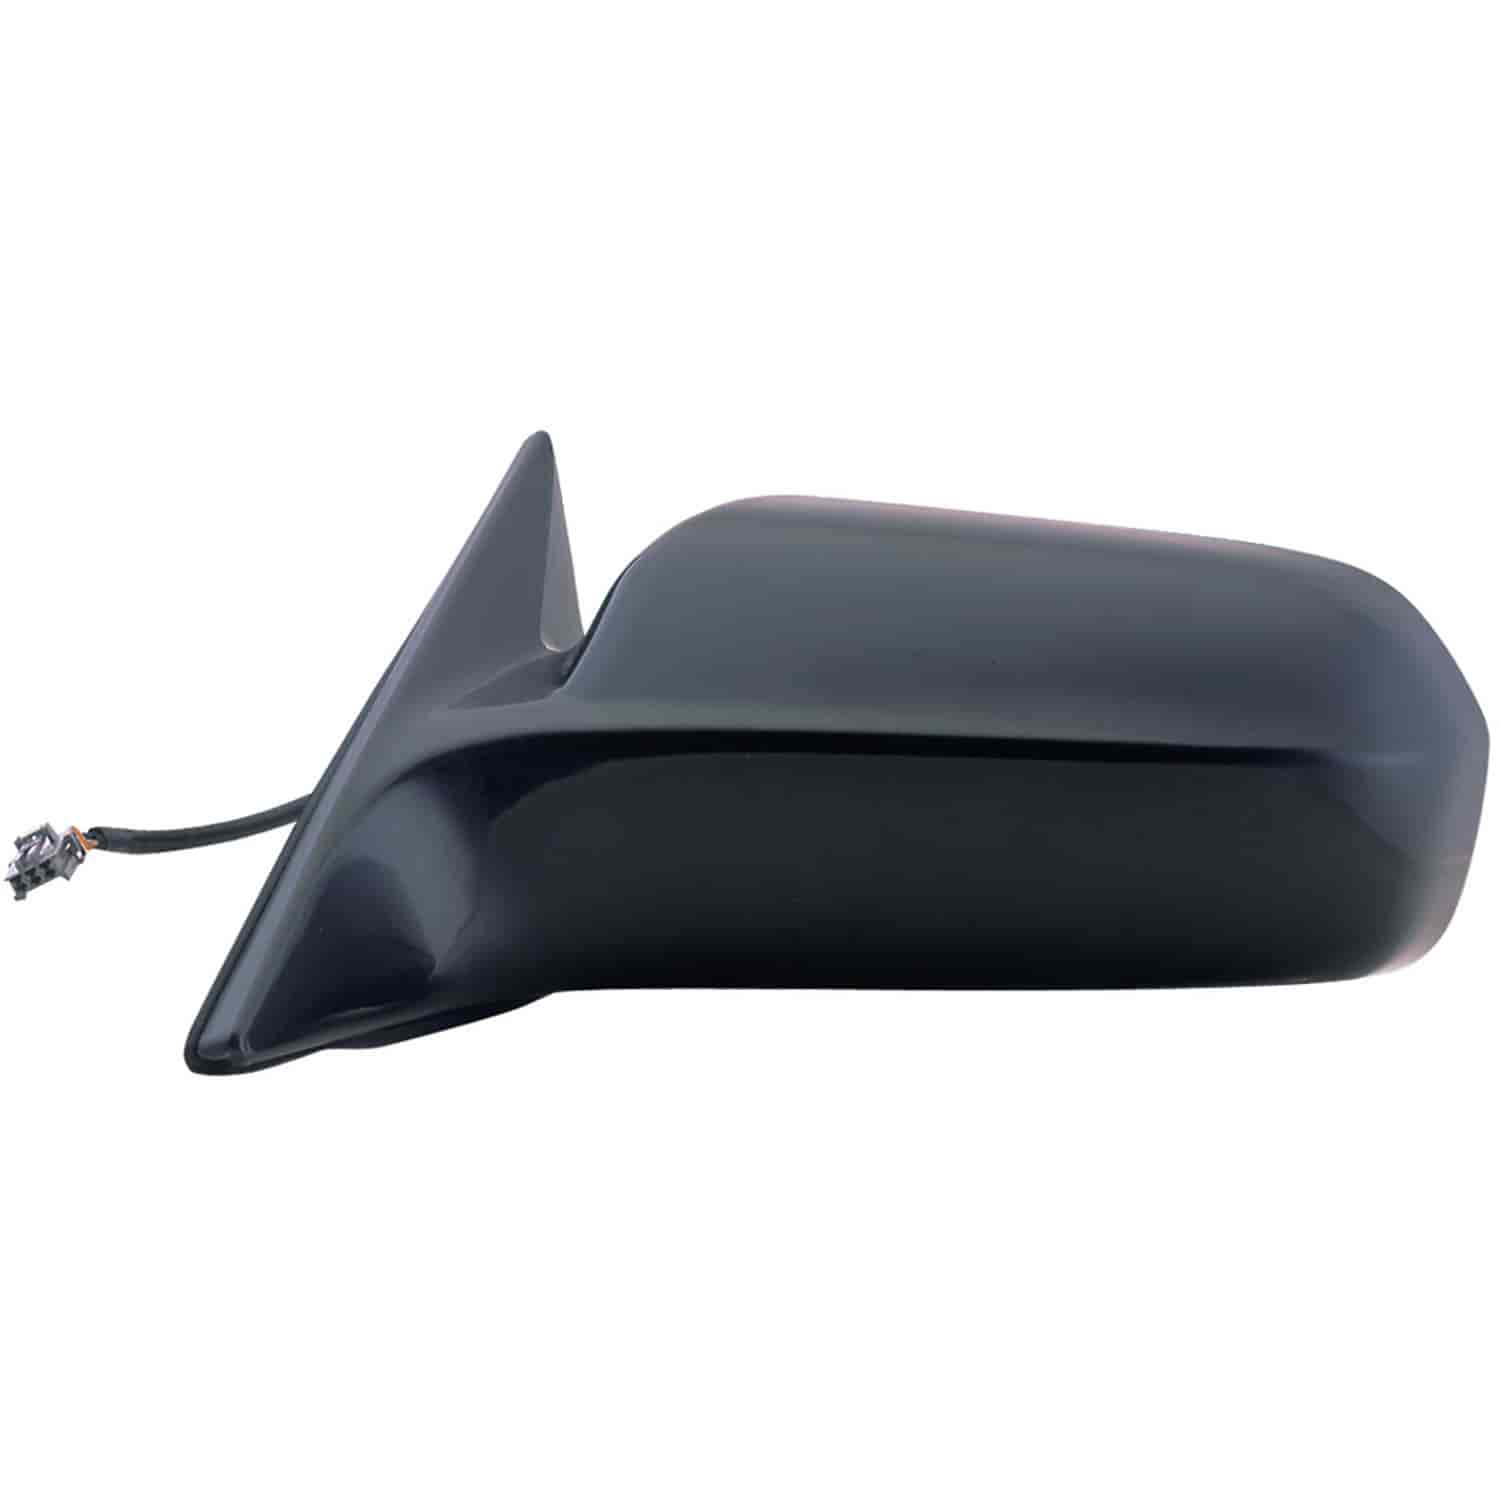 OEM Style Replacement mirror for 98 Honda Accord Coupe driver side mirror tested to fit and function